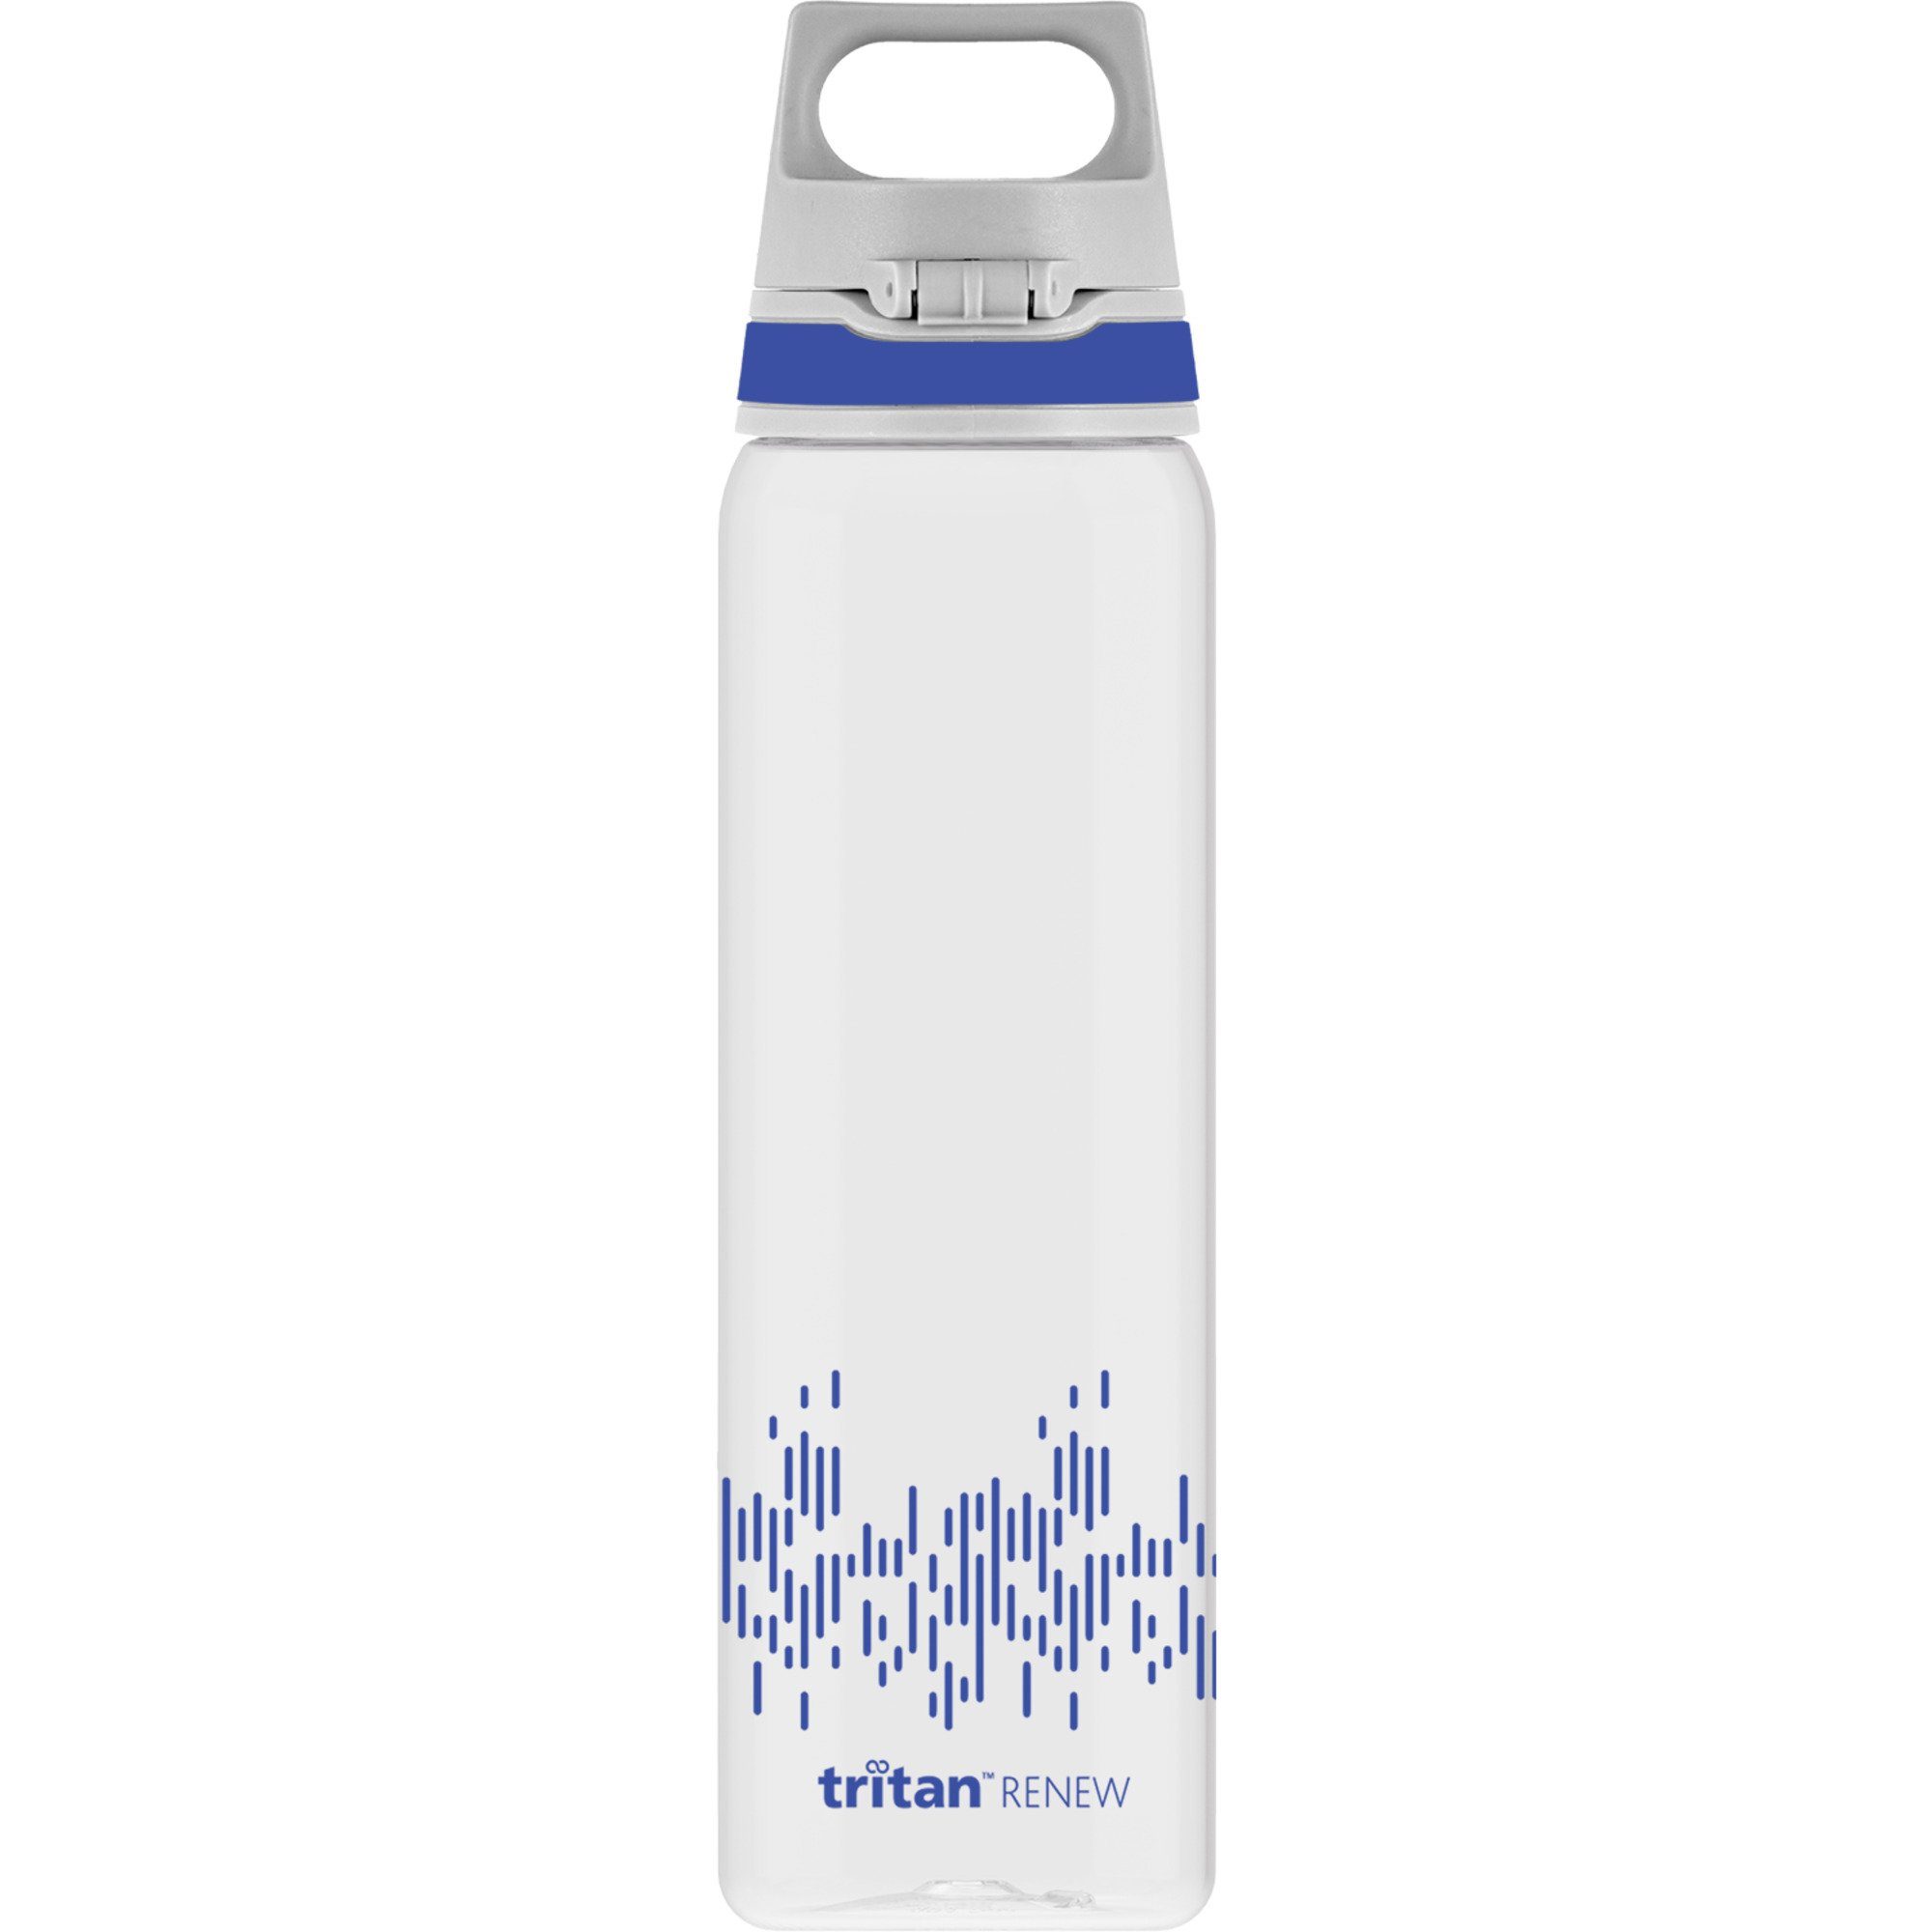 Total "Blue" Sigg SIGG Trinkflasche One MyPlanet Trinkflasche Clear